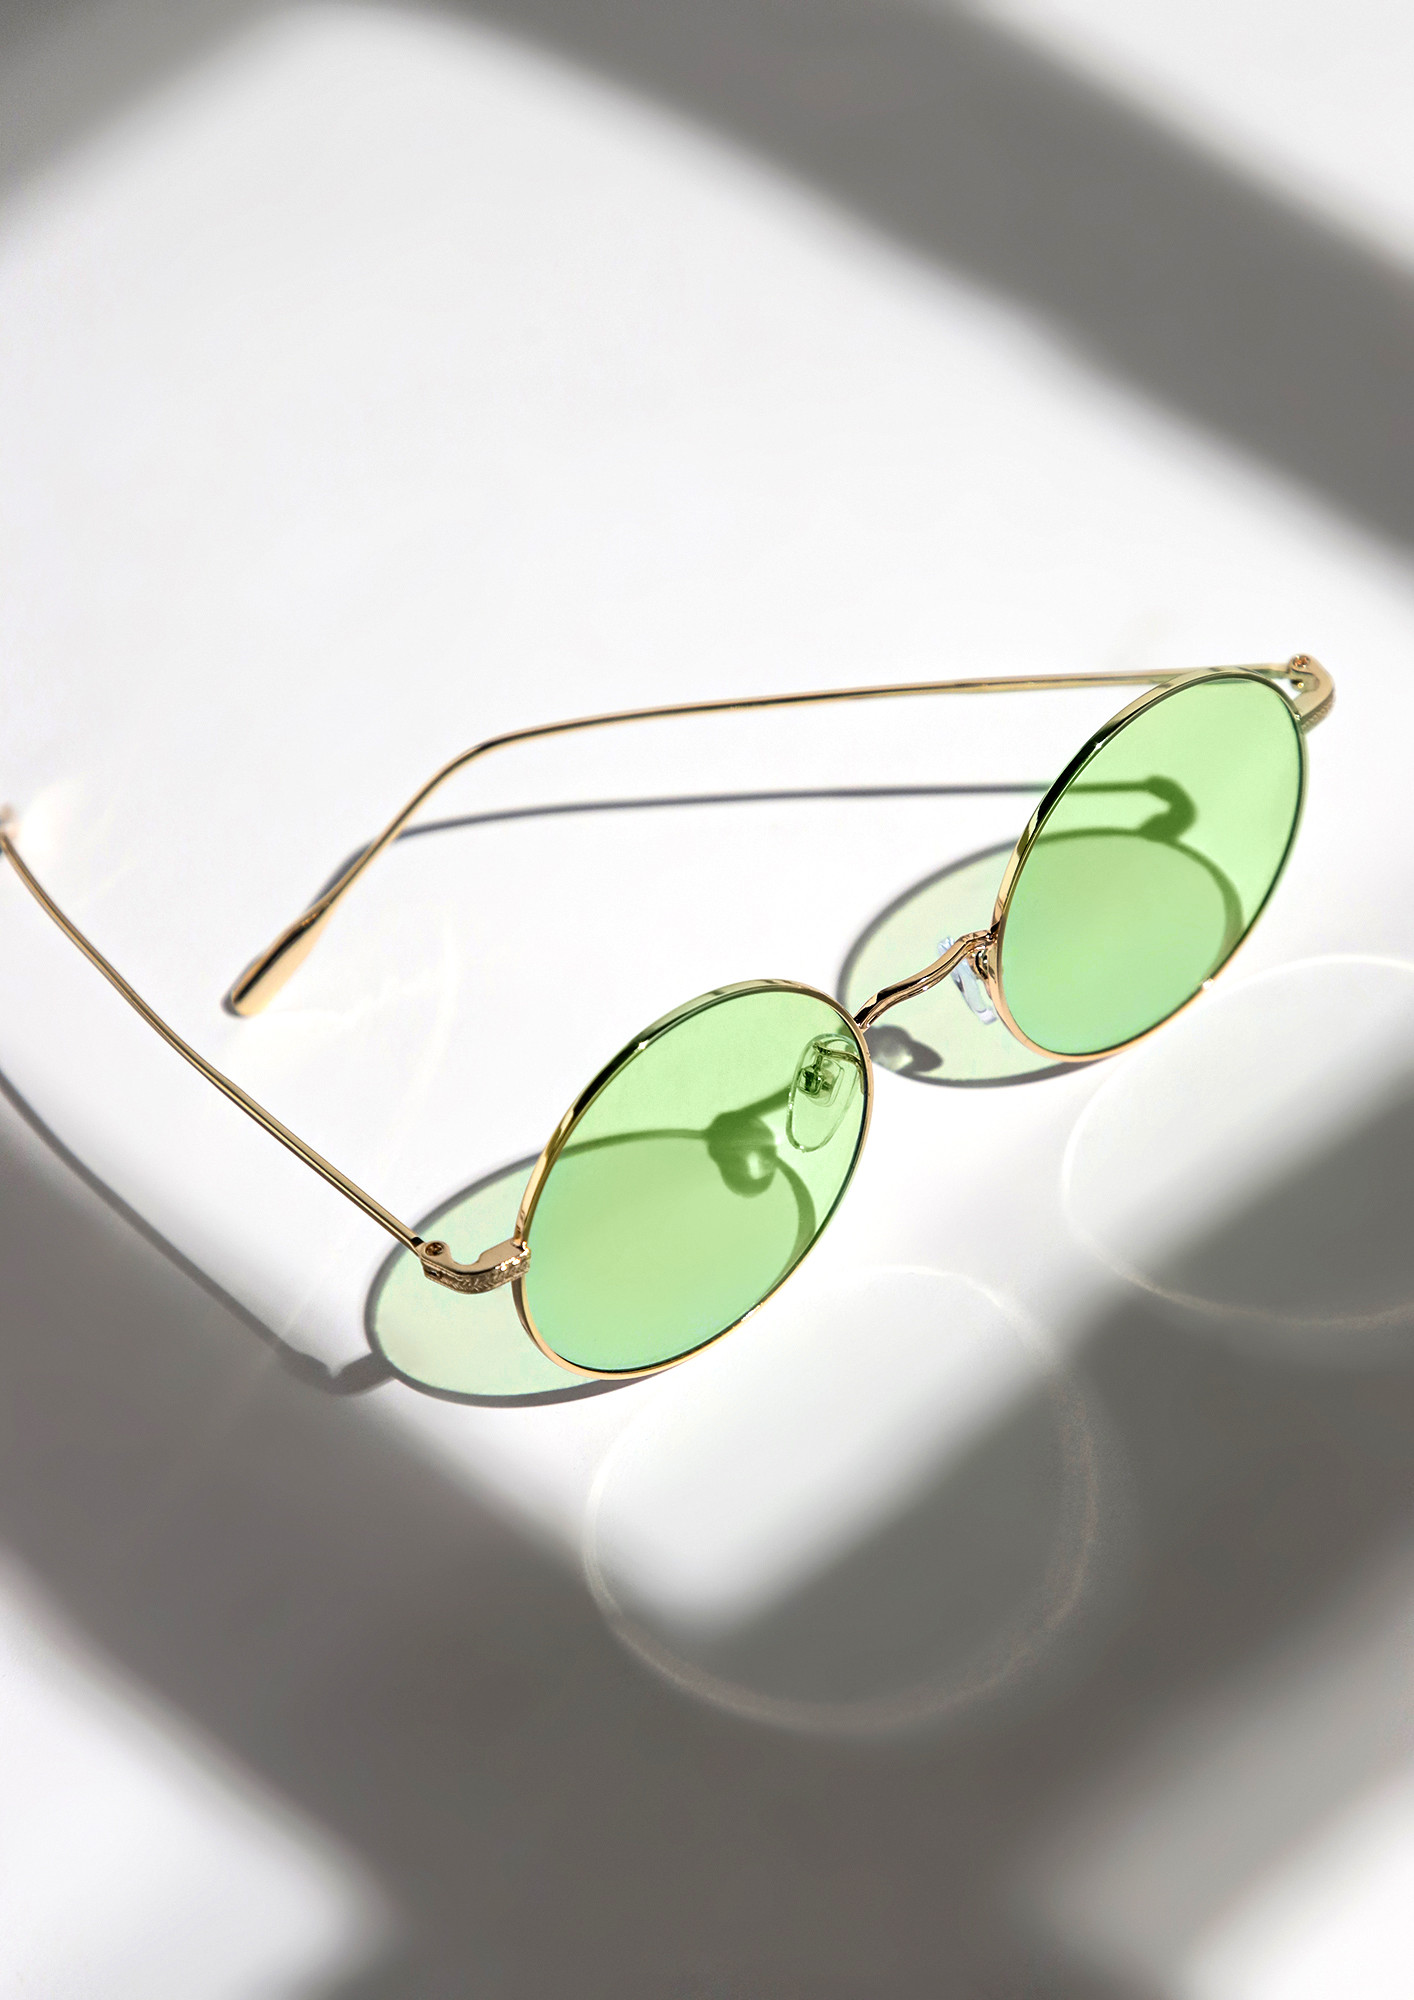 OLD TIMEY GOLD AND GREEN ROUND SUNGLASSES